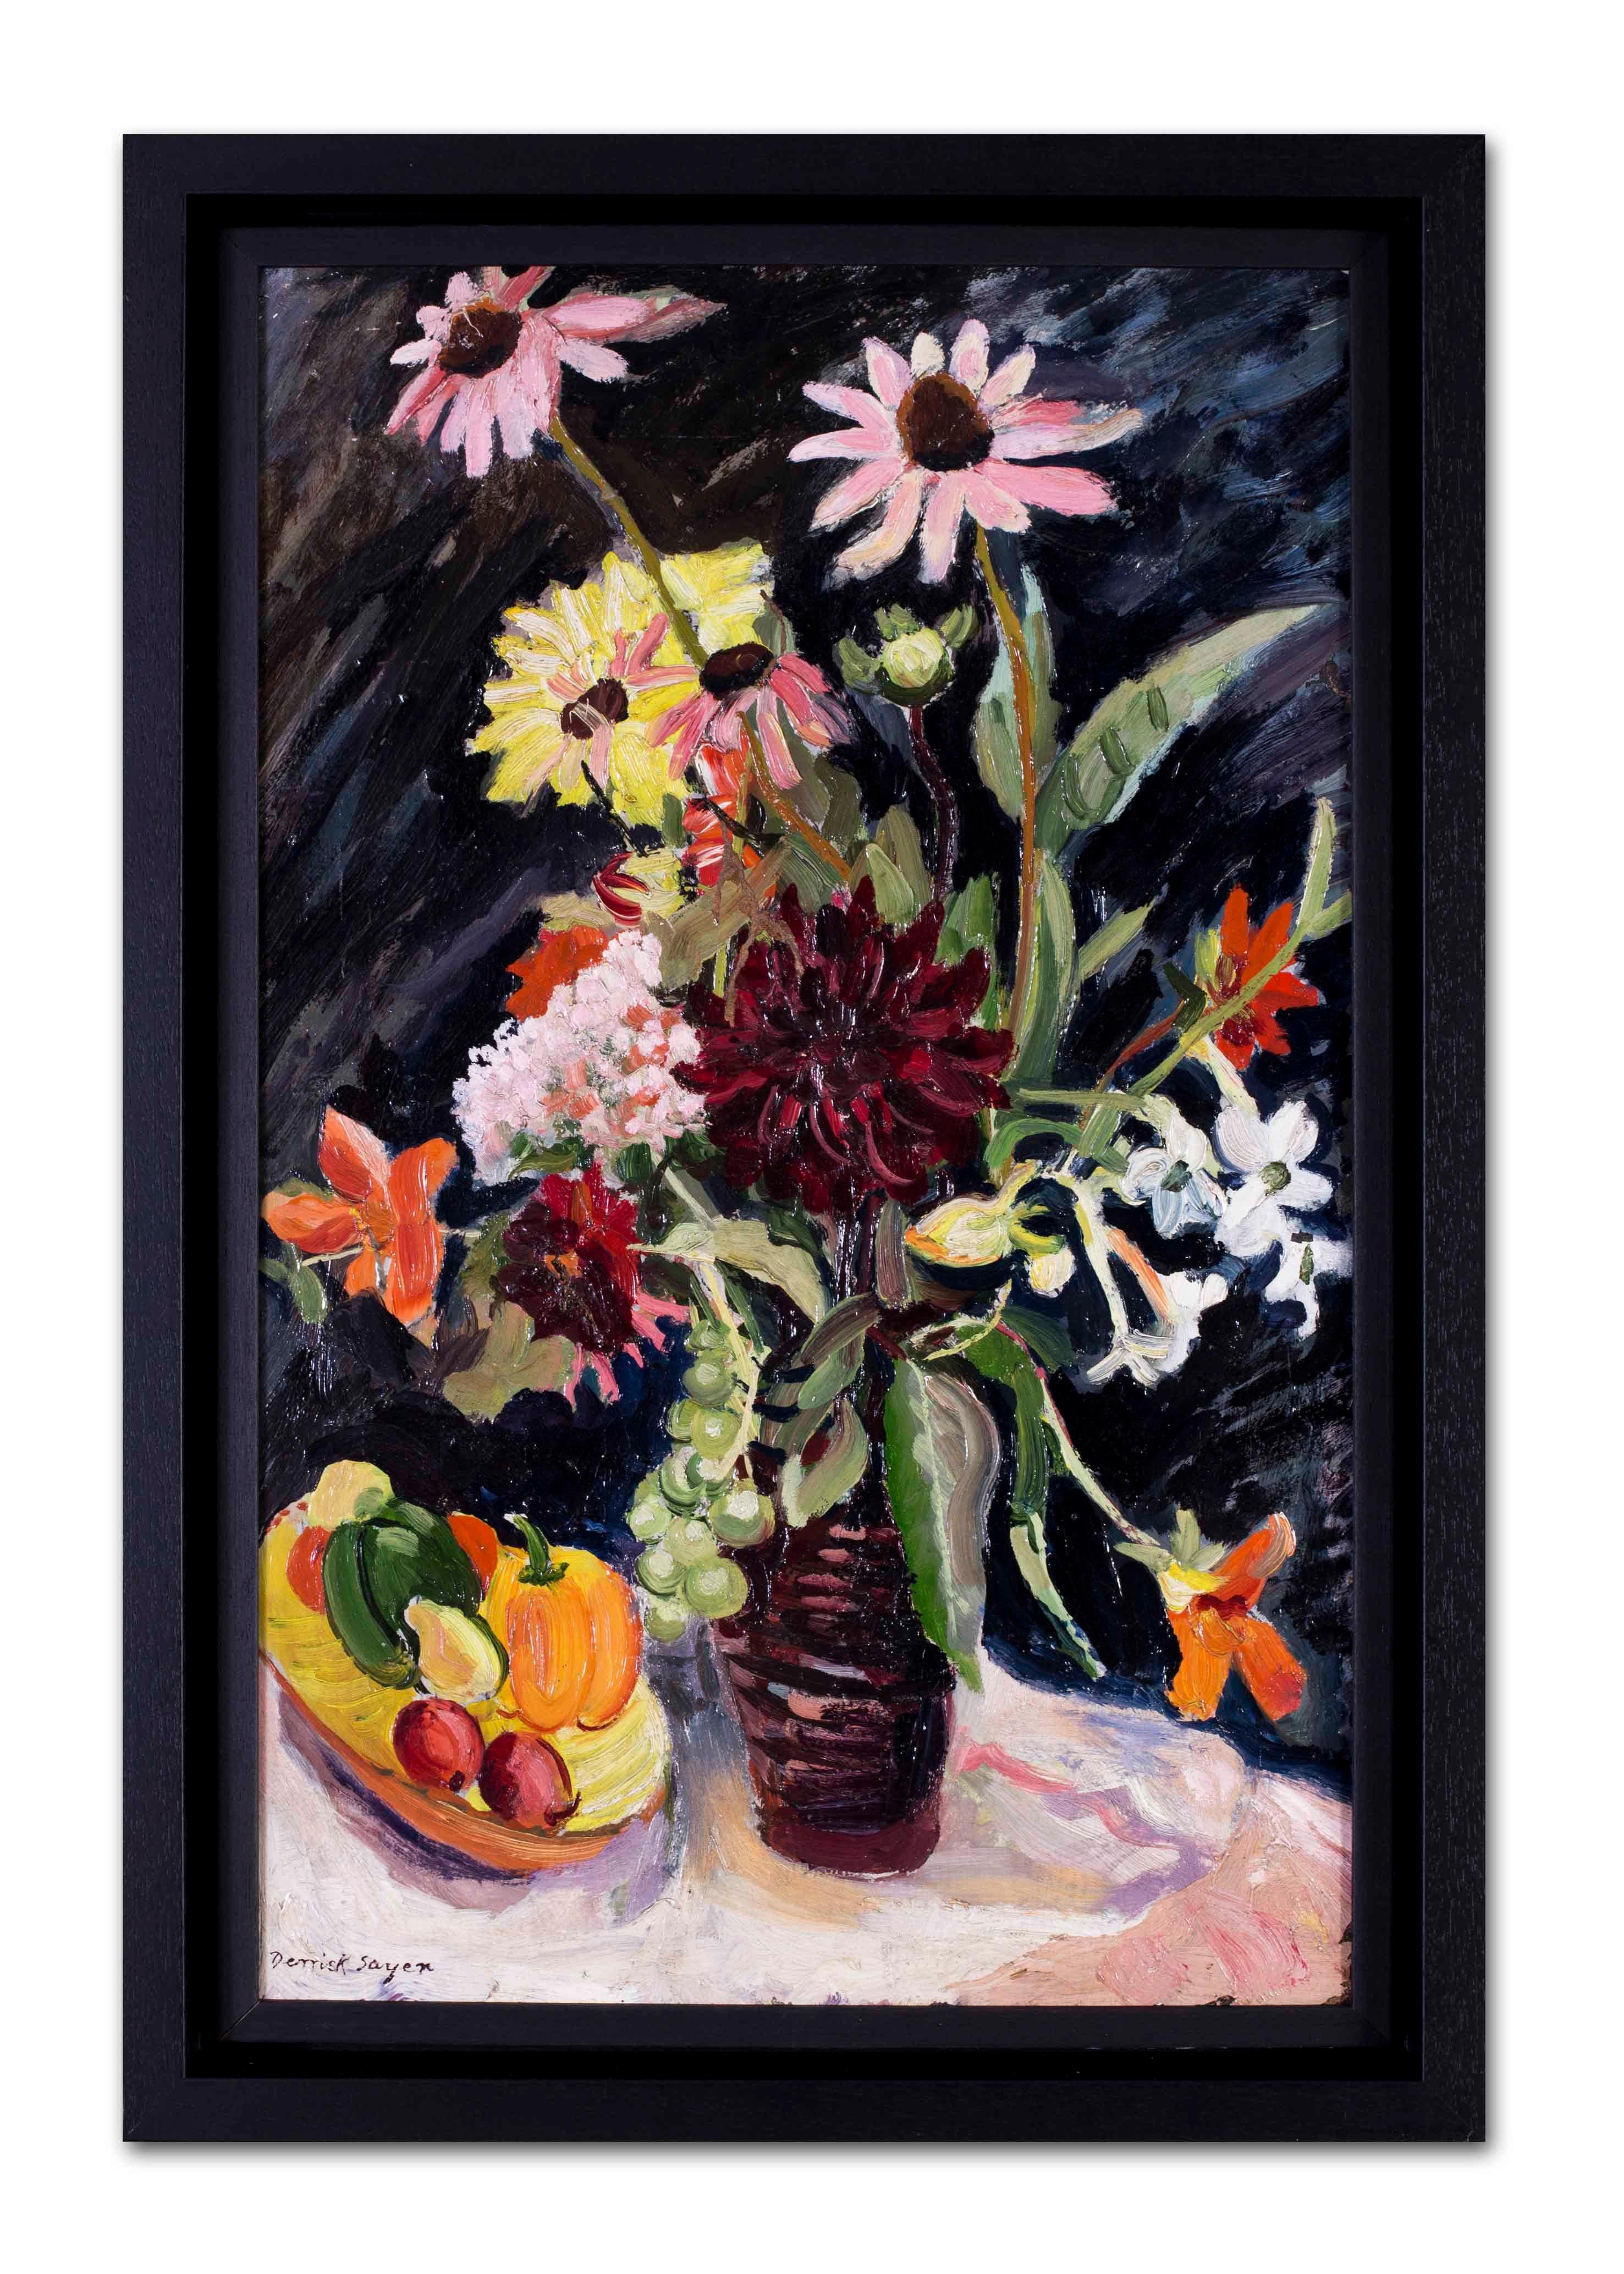 Derrick Latimer Sayer (British, 1917 – 1992)
Summer blooms and a fruit bowl
Oil on board
Signed Derrick Sayer (lower left)
26 x 16.1/2 in. (66 x 42cm.)

Sayer studied at the Chelsea School Art under Henry Moore and Graham Sutherland.  He spent time